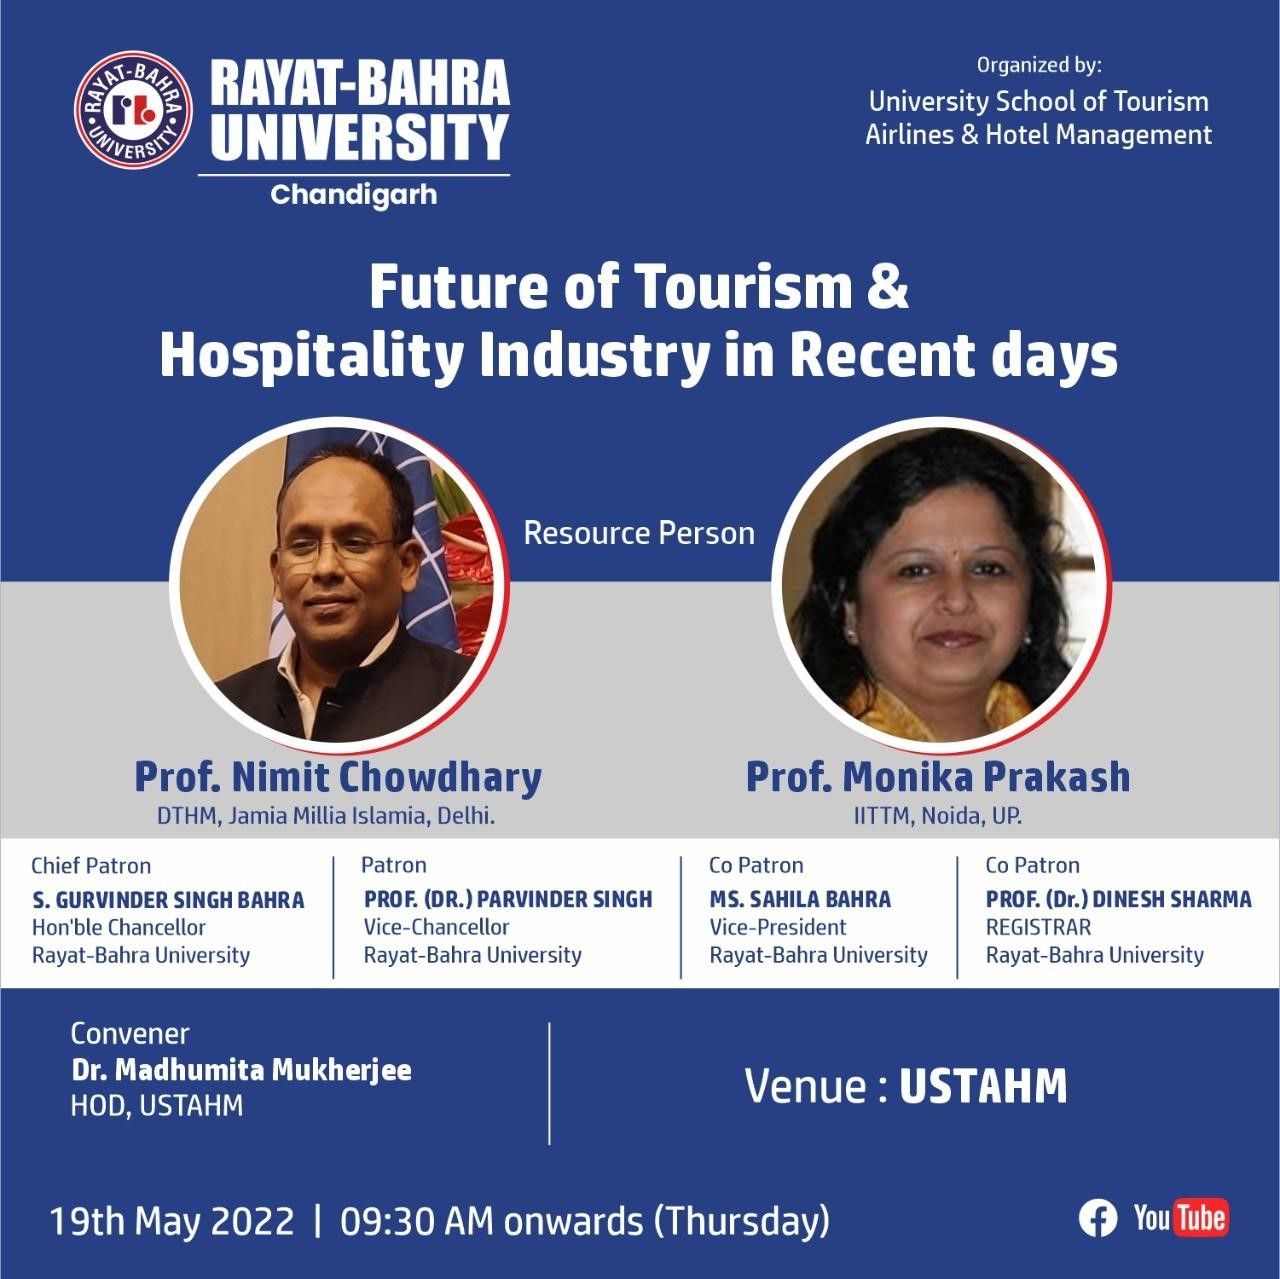 EVENT OF TOURISM & HOSPITALITY INDUSTRY IN RECENT DAYS